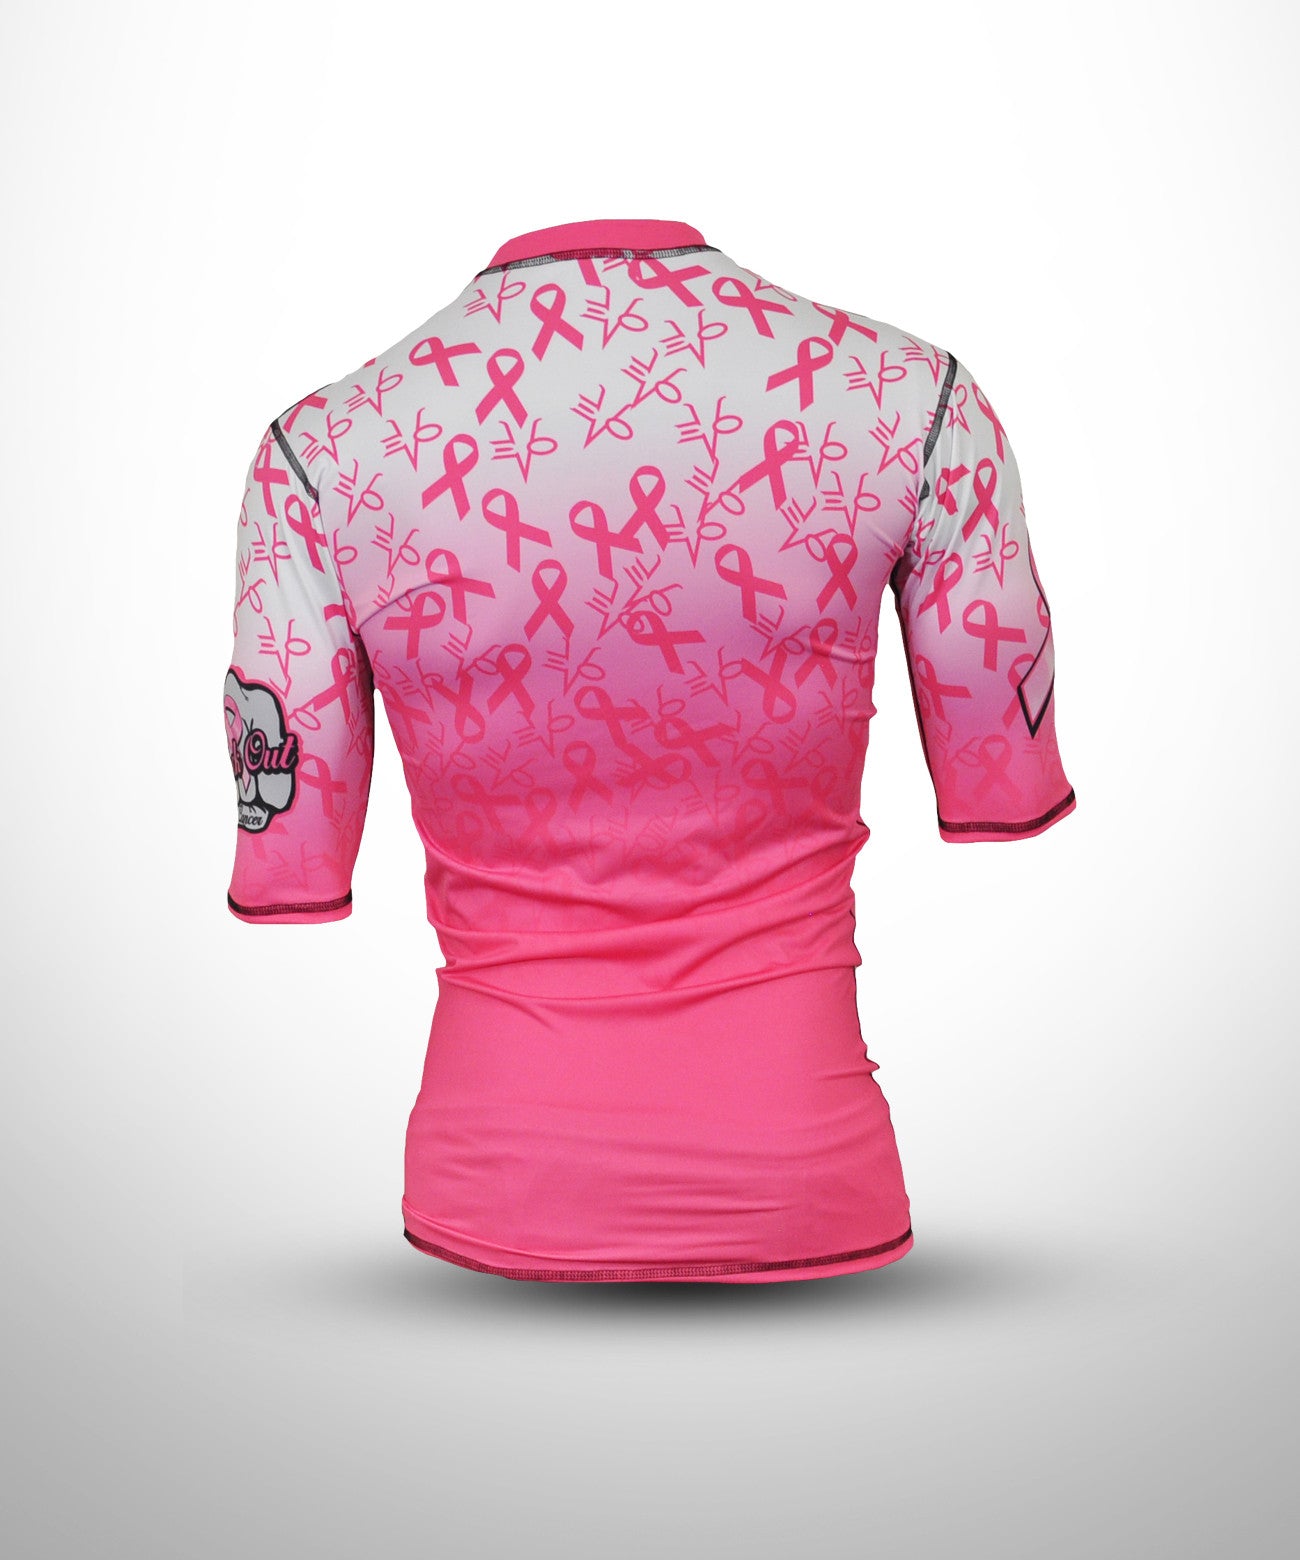 OA Apparel Breast Cancer Awareness Fight Short Sleeve Shirt (Customized Buy-In) YL